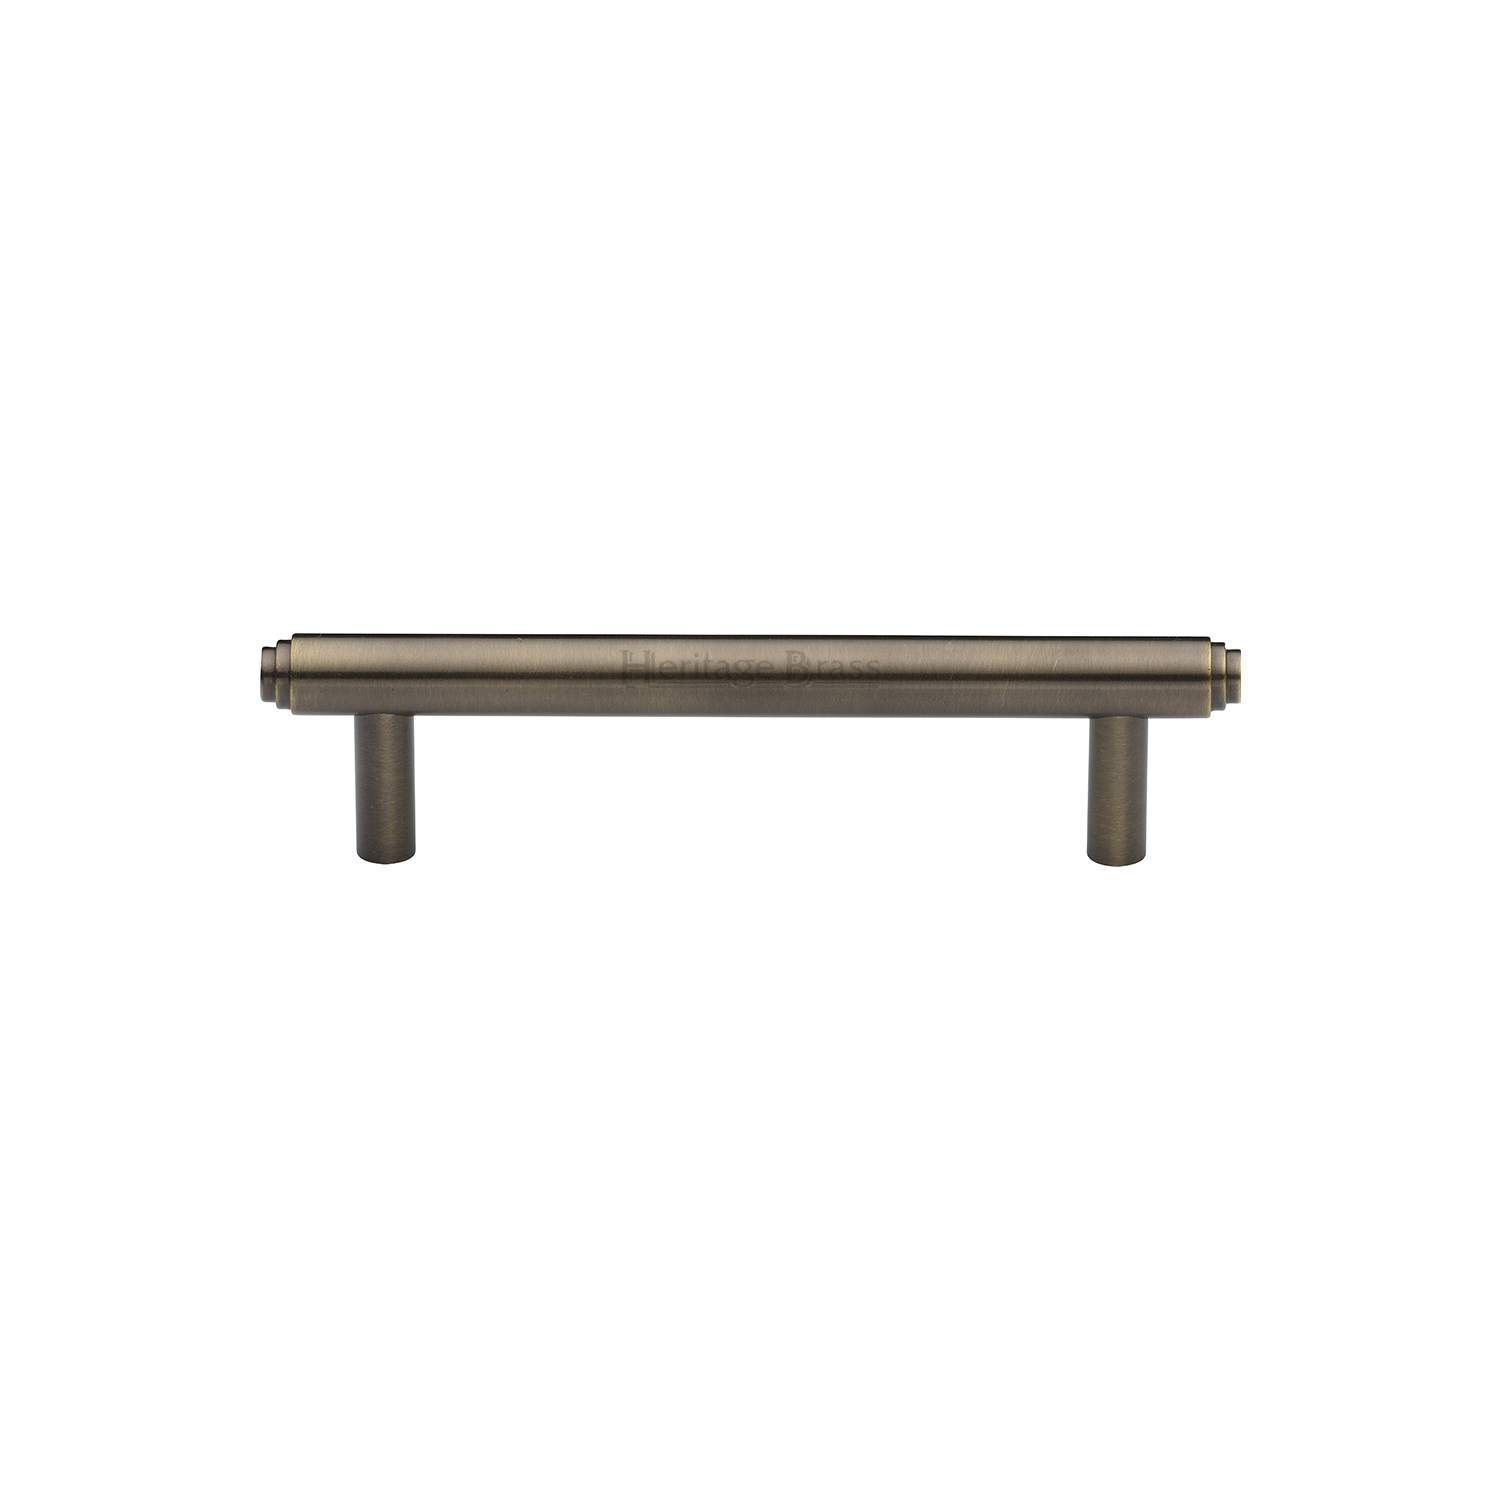 Heritage Brass Cabinet Pull Stepped Design 96mm c/c